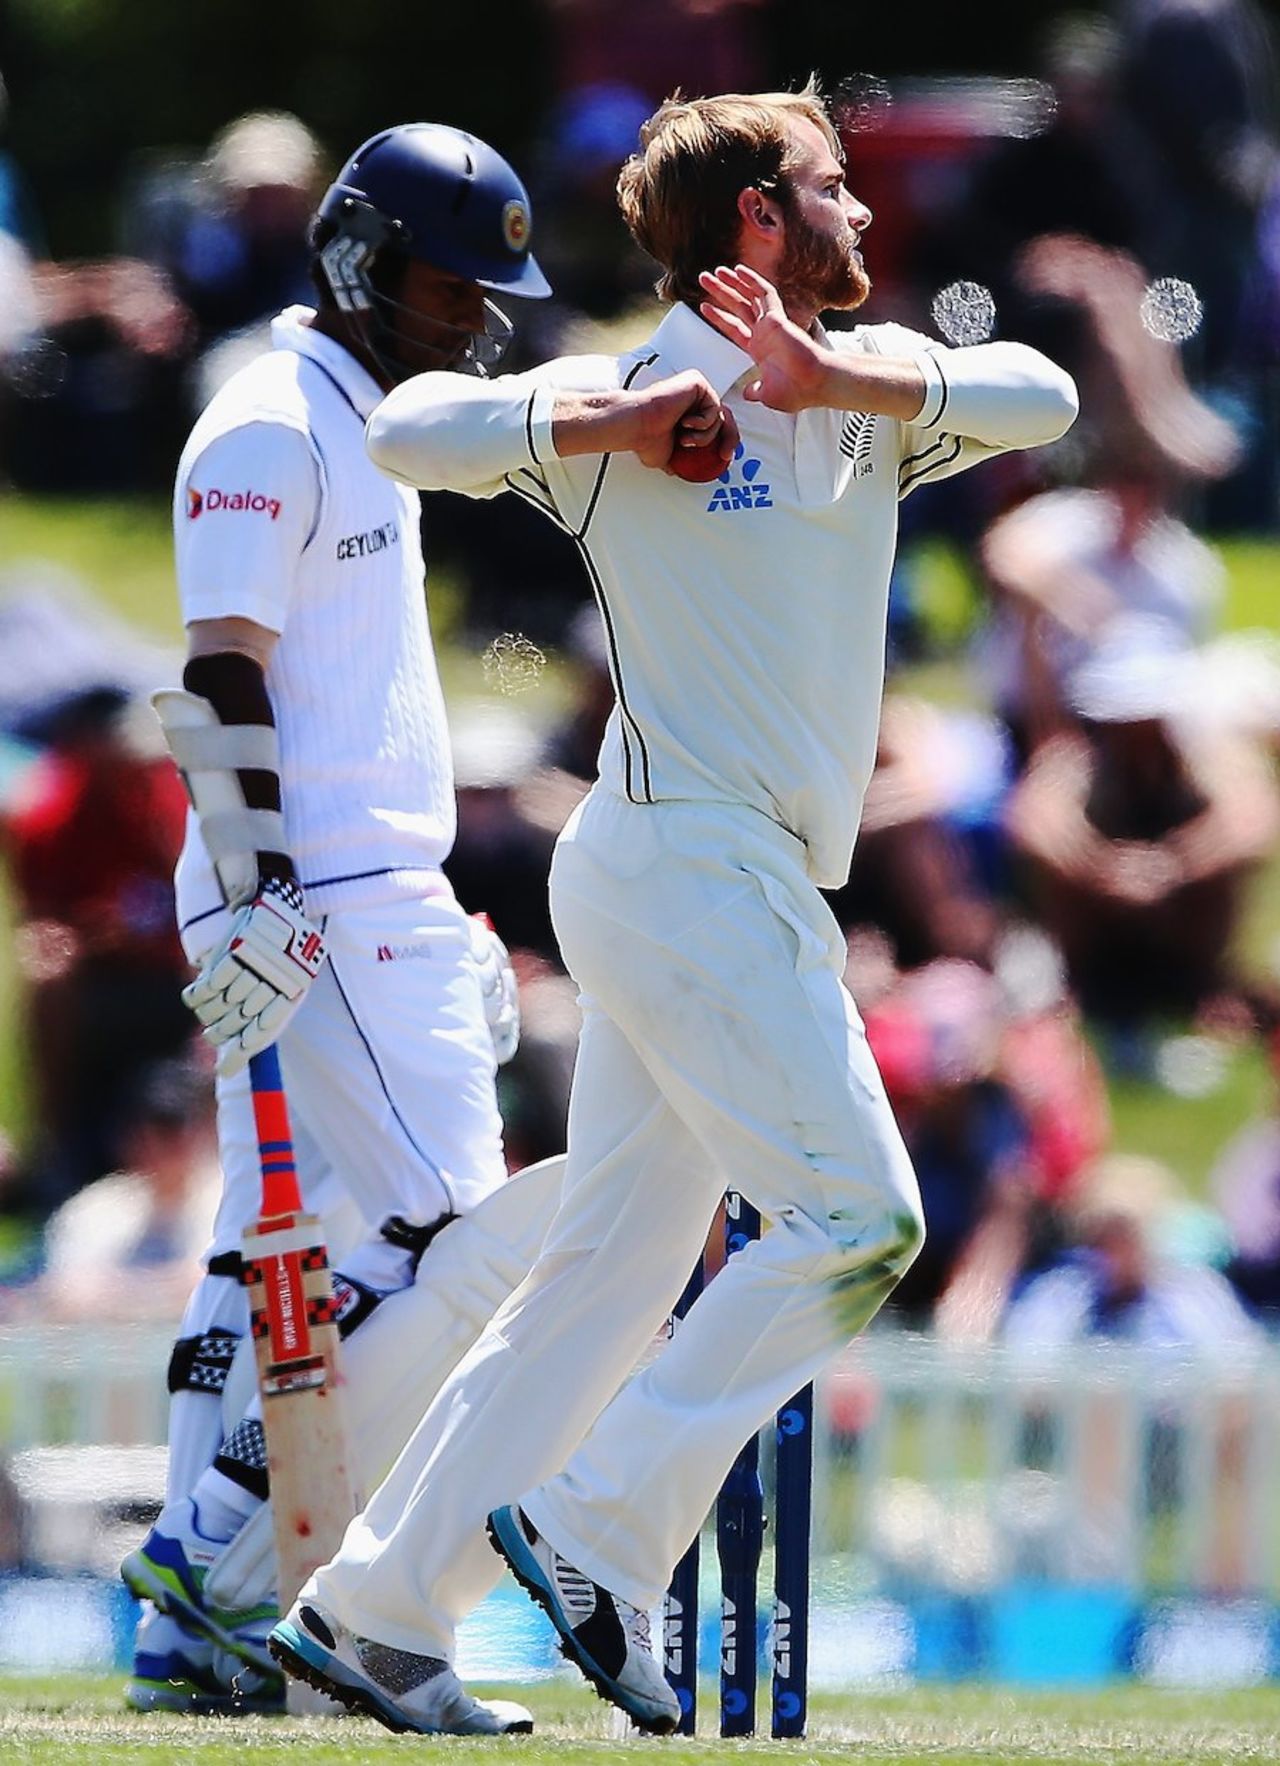 Kane Williamson bowls after having had his action cleared, New Zealand v Sri Lanka, 1st Test, Christchurch, 3rd day, December 28, 2014